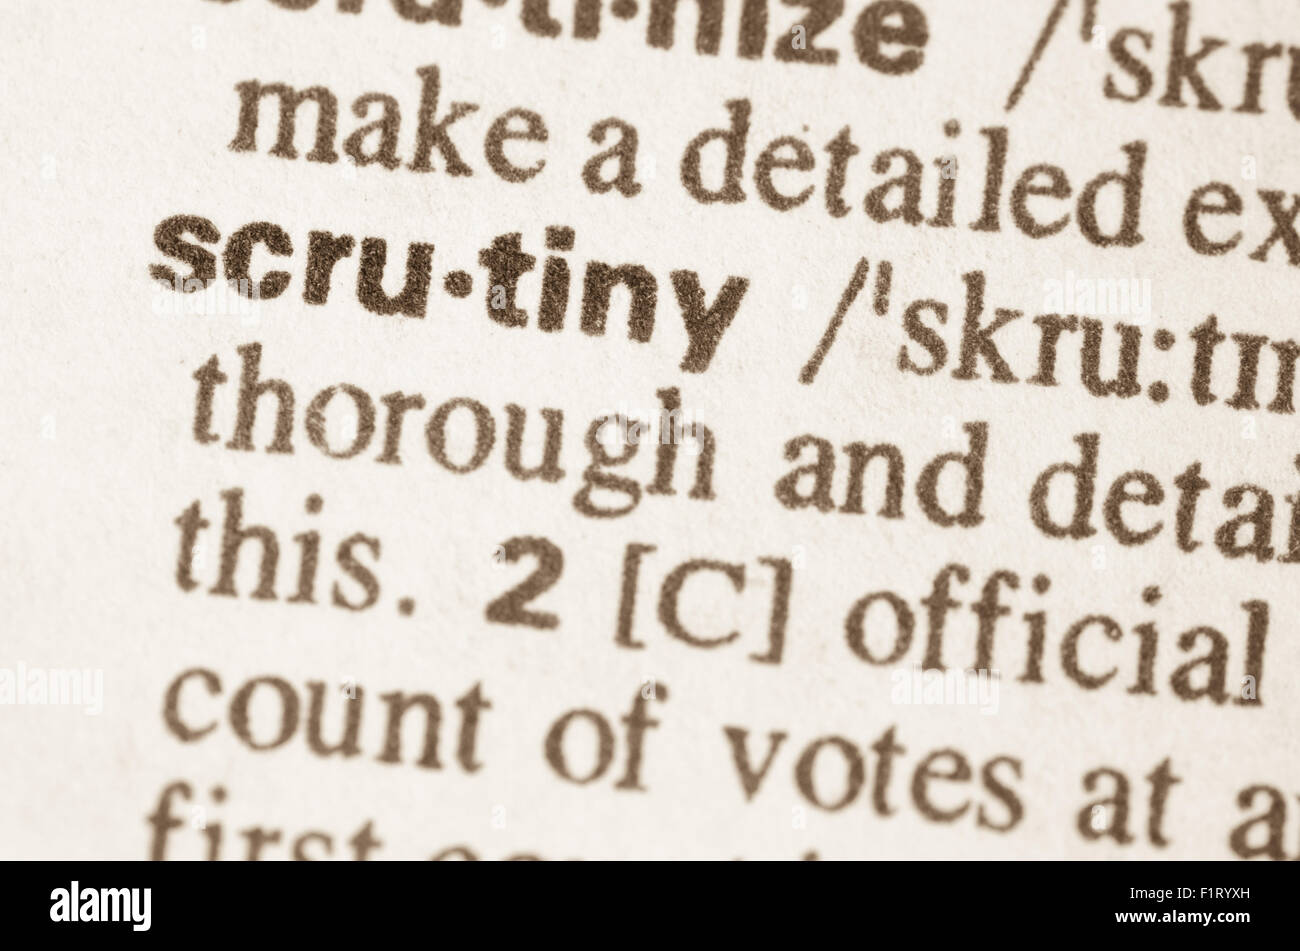 Definition of word scrutiny in dictionary Stock Photo